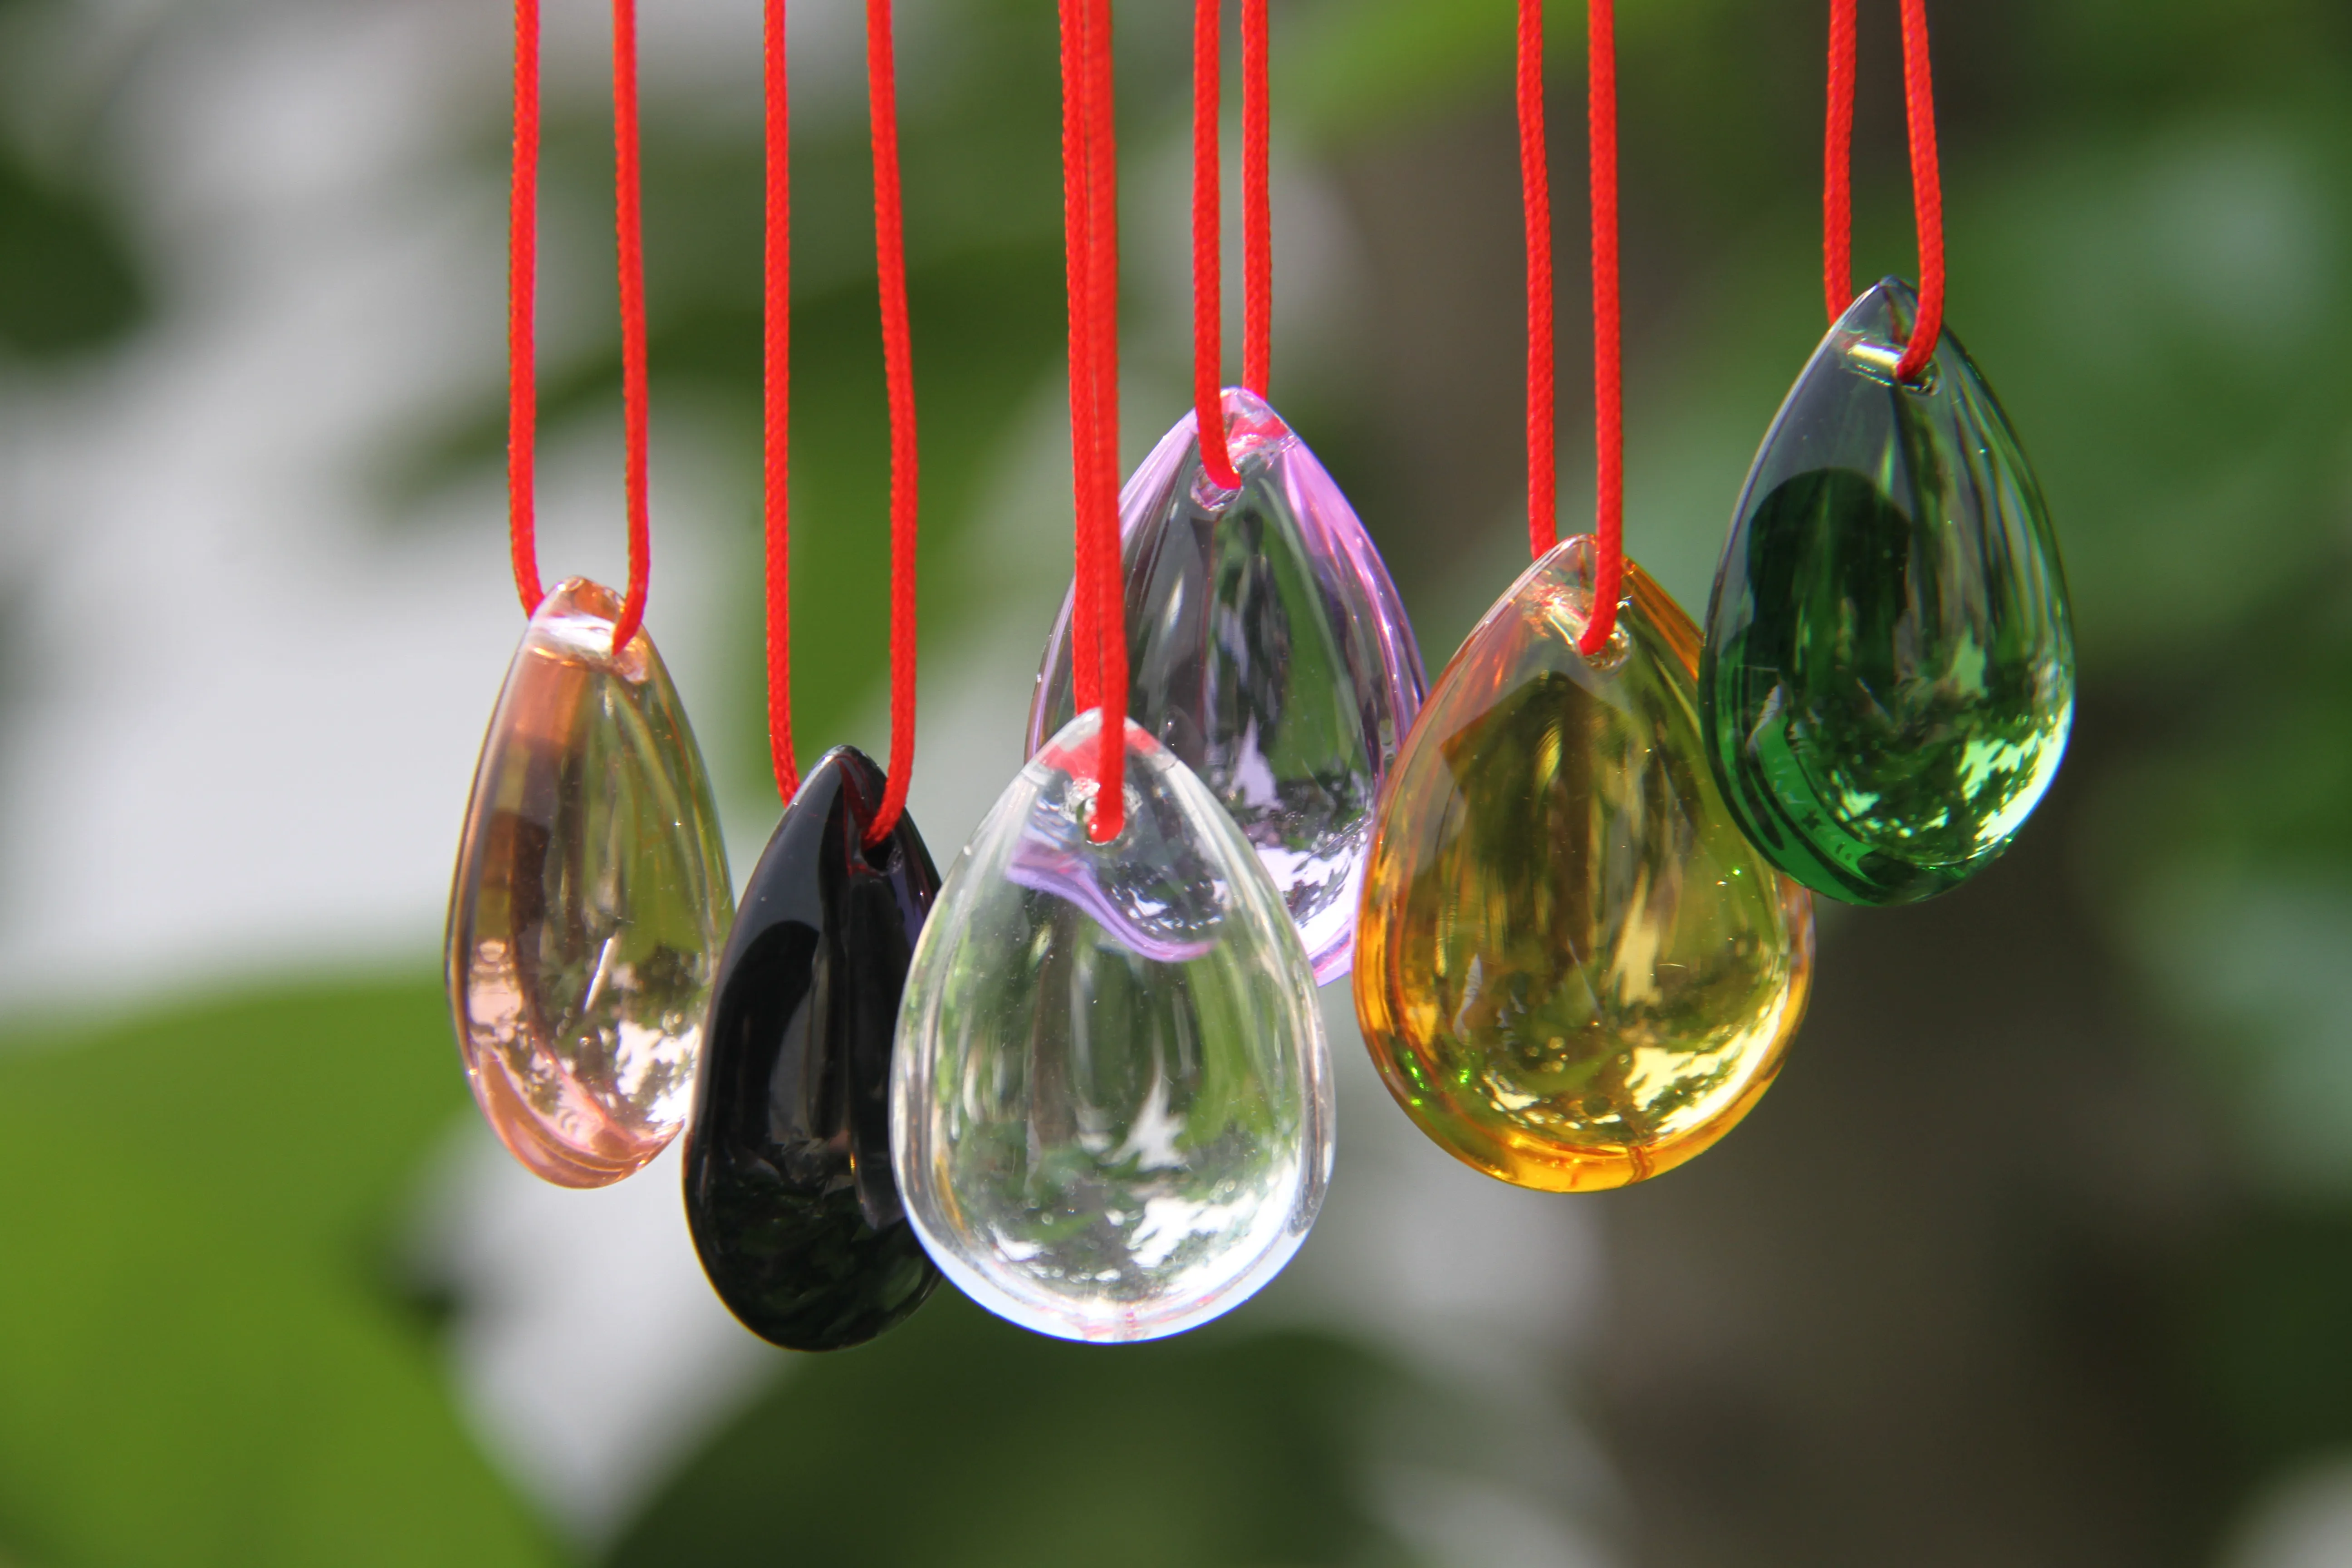 Colors 22mm Crystal Smooth Beads Glass Tear Drop Pendant with Red Strand For Suncatcher Necklace Fenshui Home Marrige Decoration подвесная люстра ambiente benisa 2226 6 pb tear drop